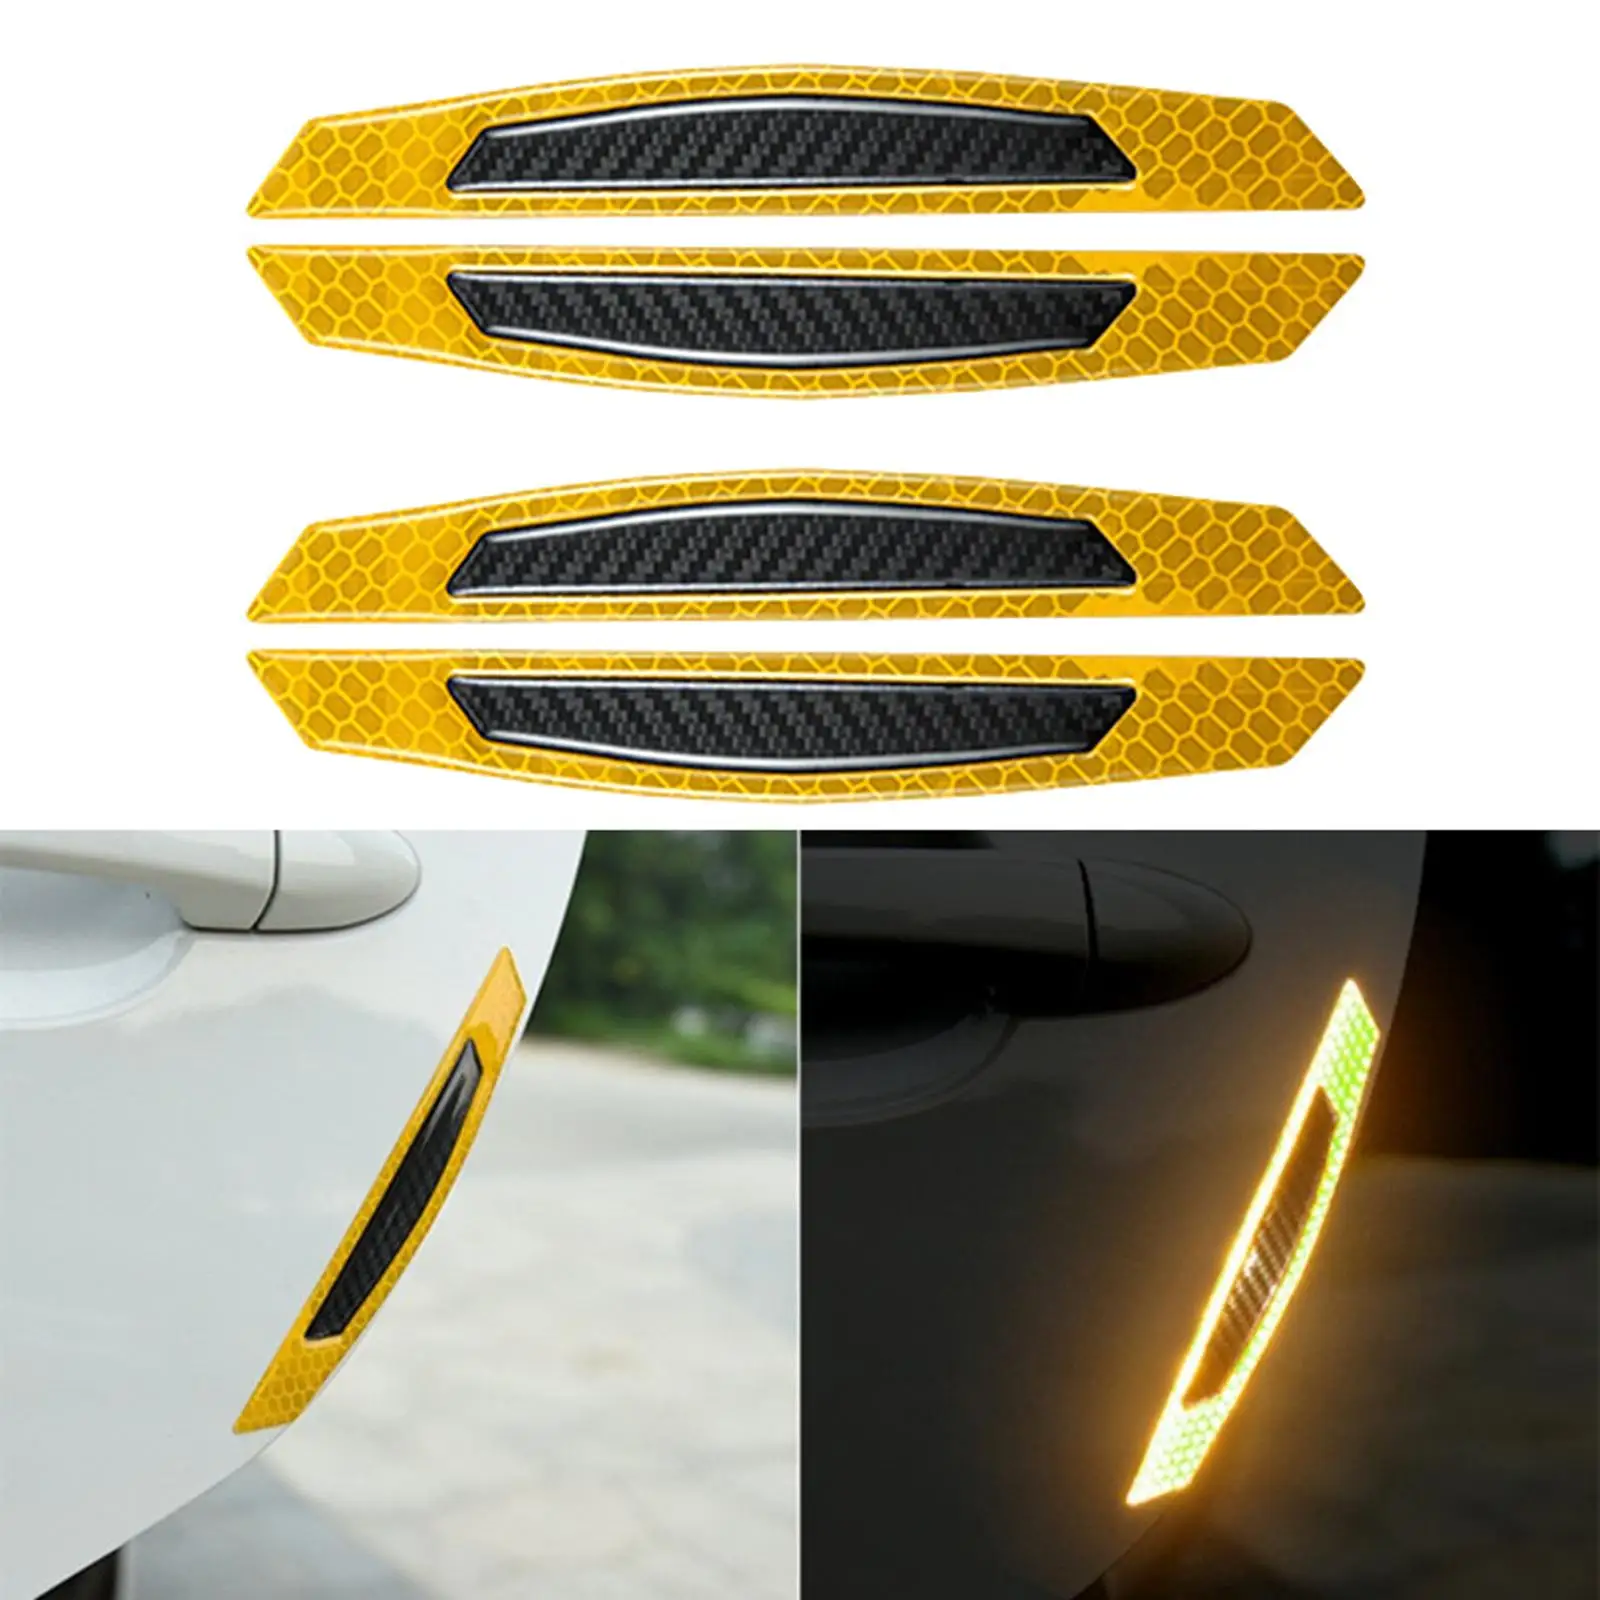 4 Pieces/ Reflective Stickers Car Door Side Sticker Decal Warning Tape Reflective Strips